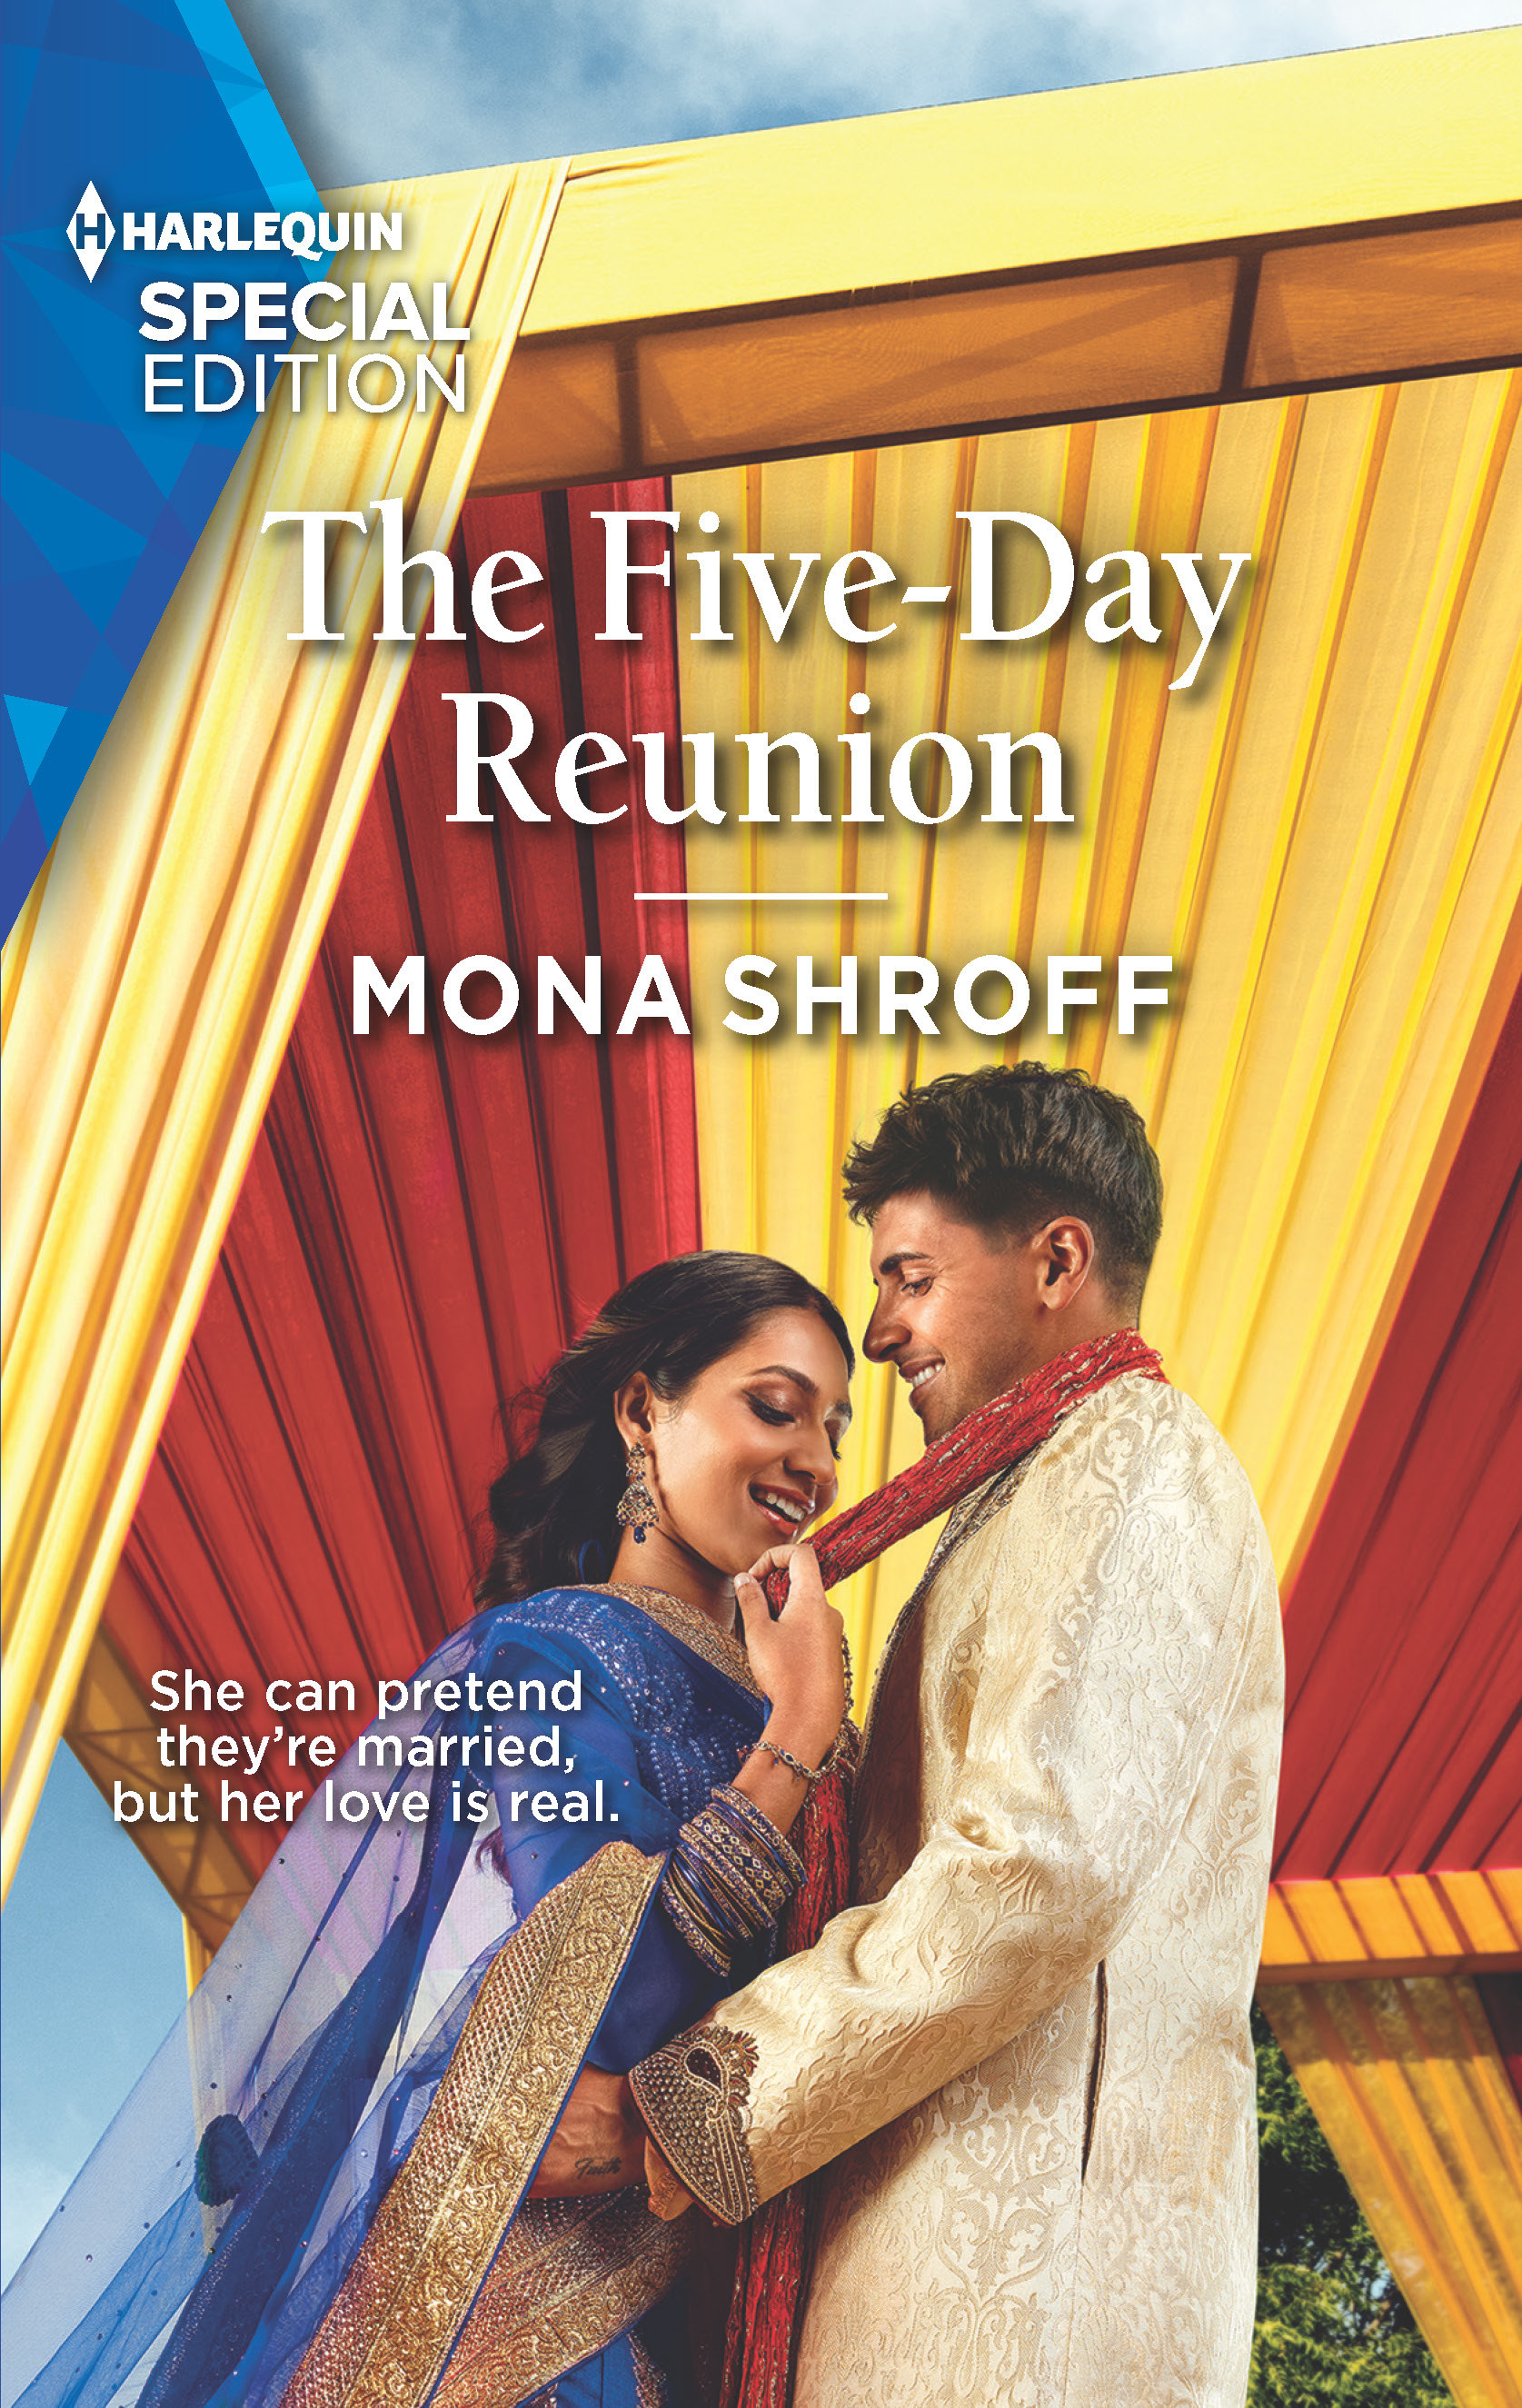 The Five-Day Reunion cover. Book by Mona Shroff